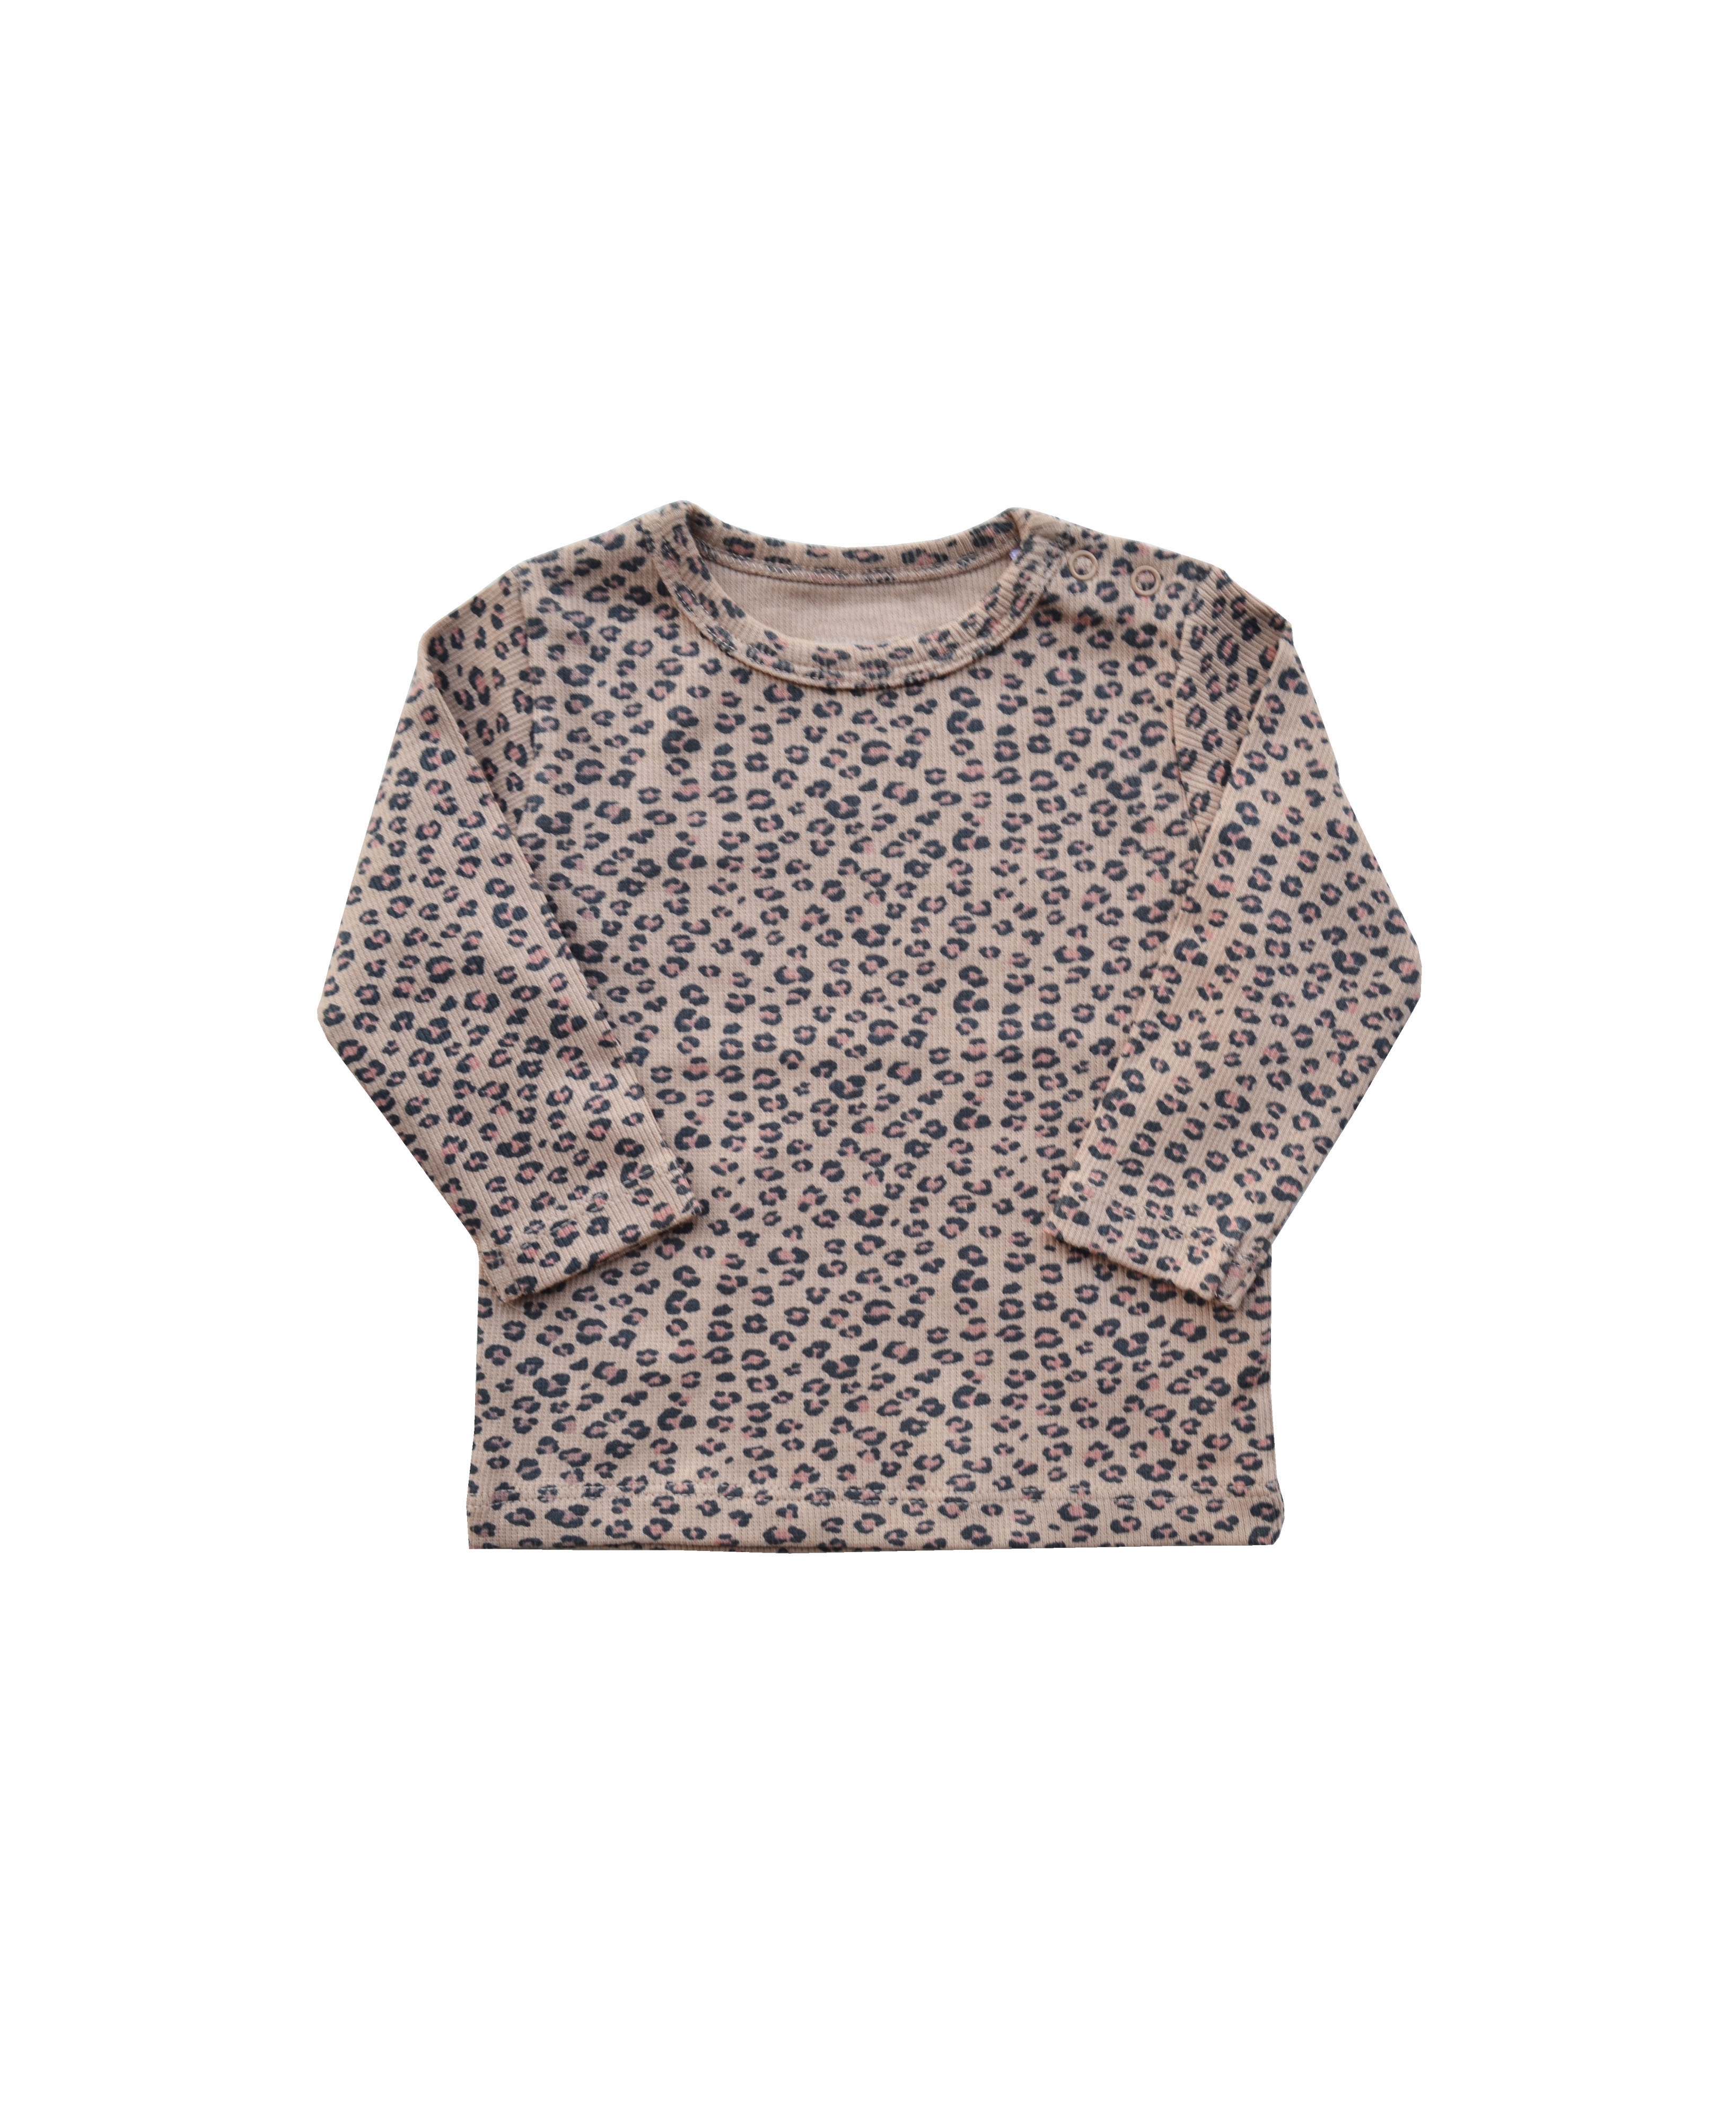 Babeez | Girls Top with Leopard Print (100% Cotton Rib) undefined